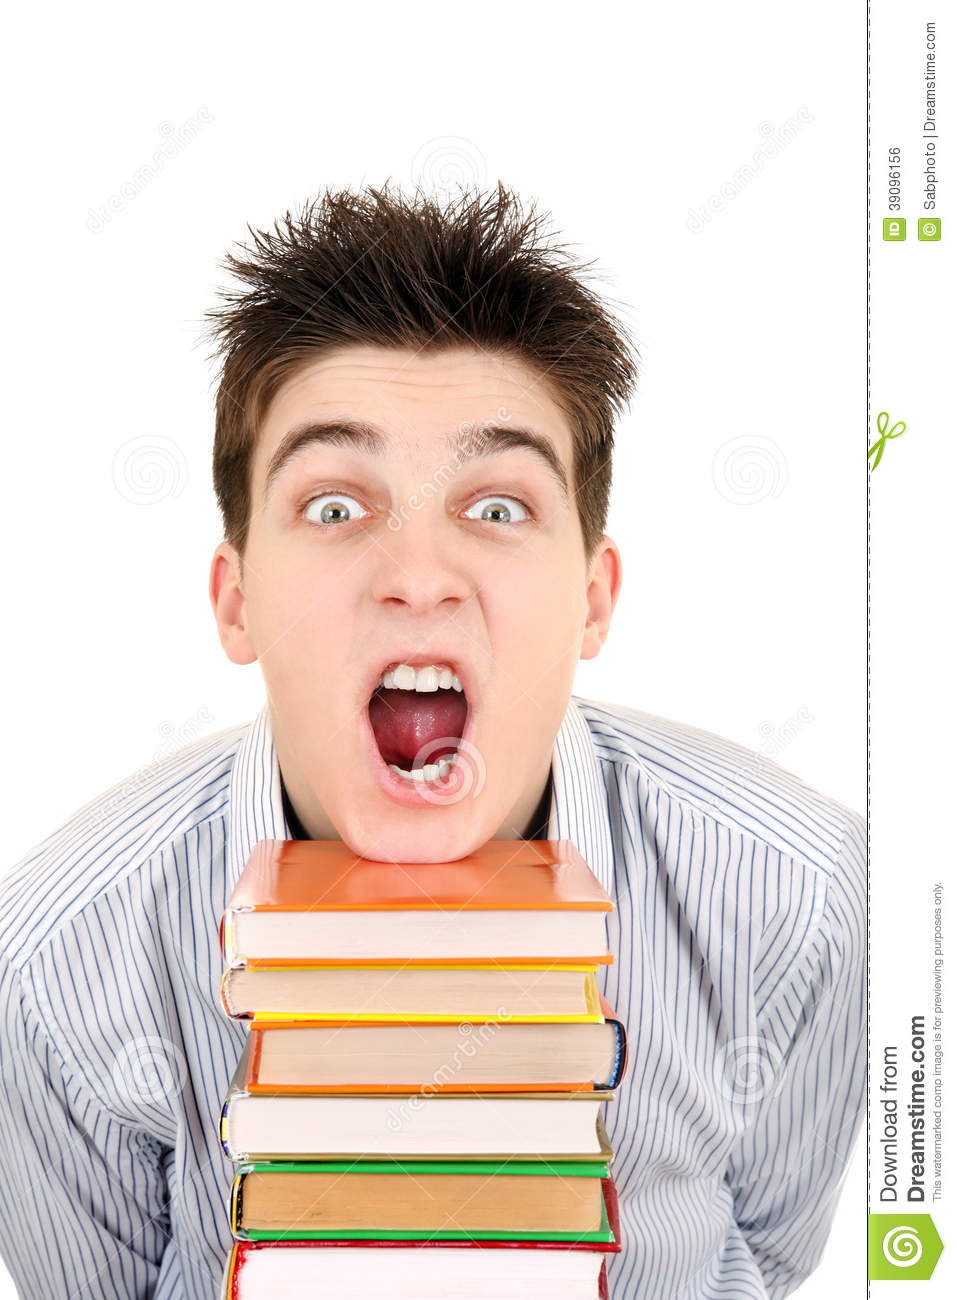 Excited Student With The Books Isolated On The White Background